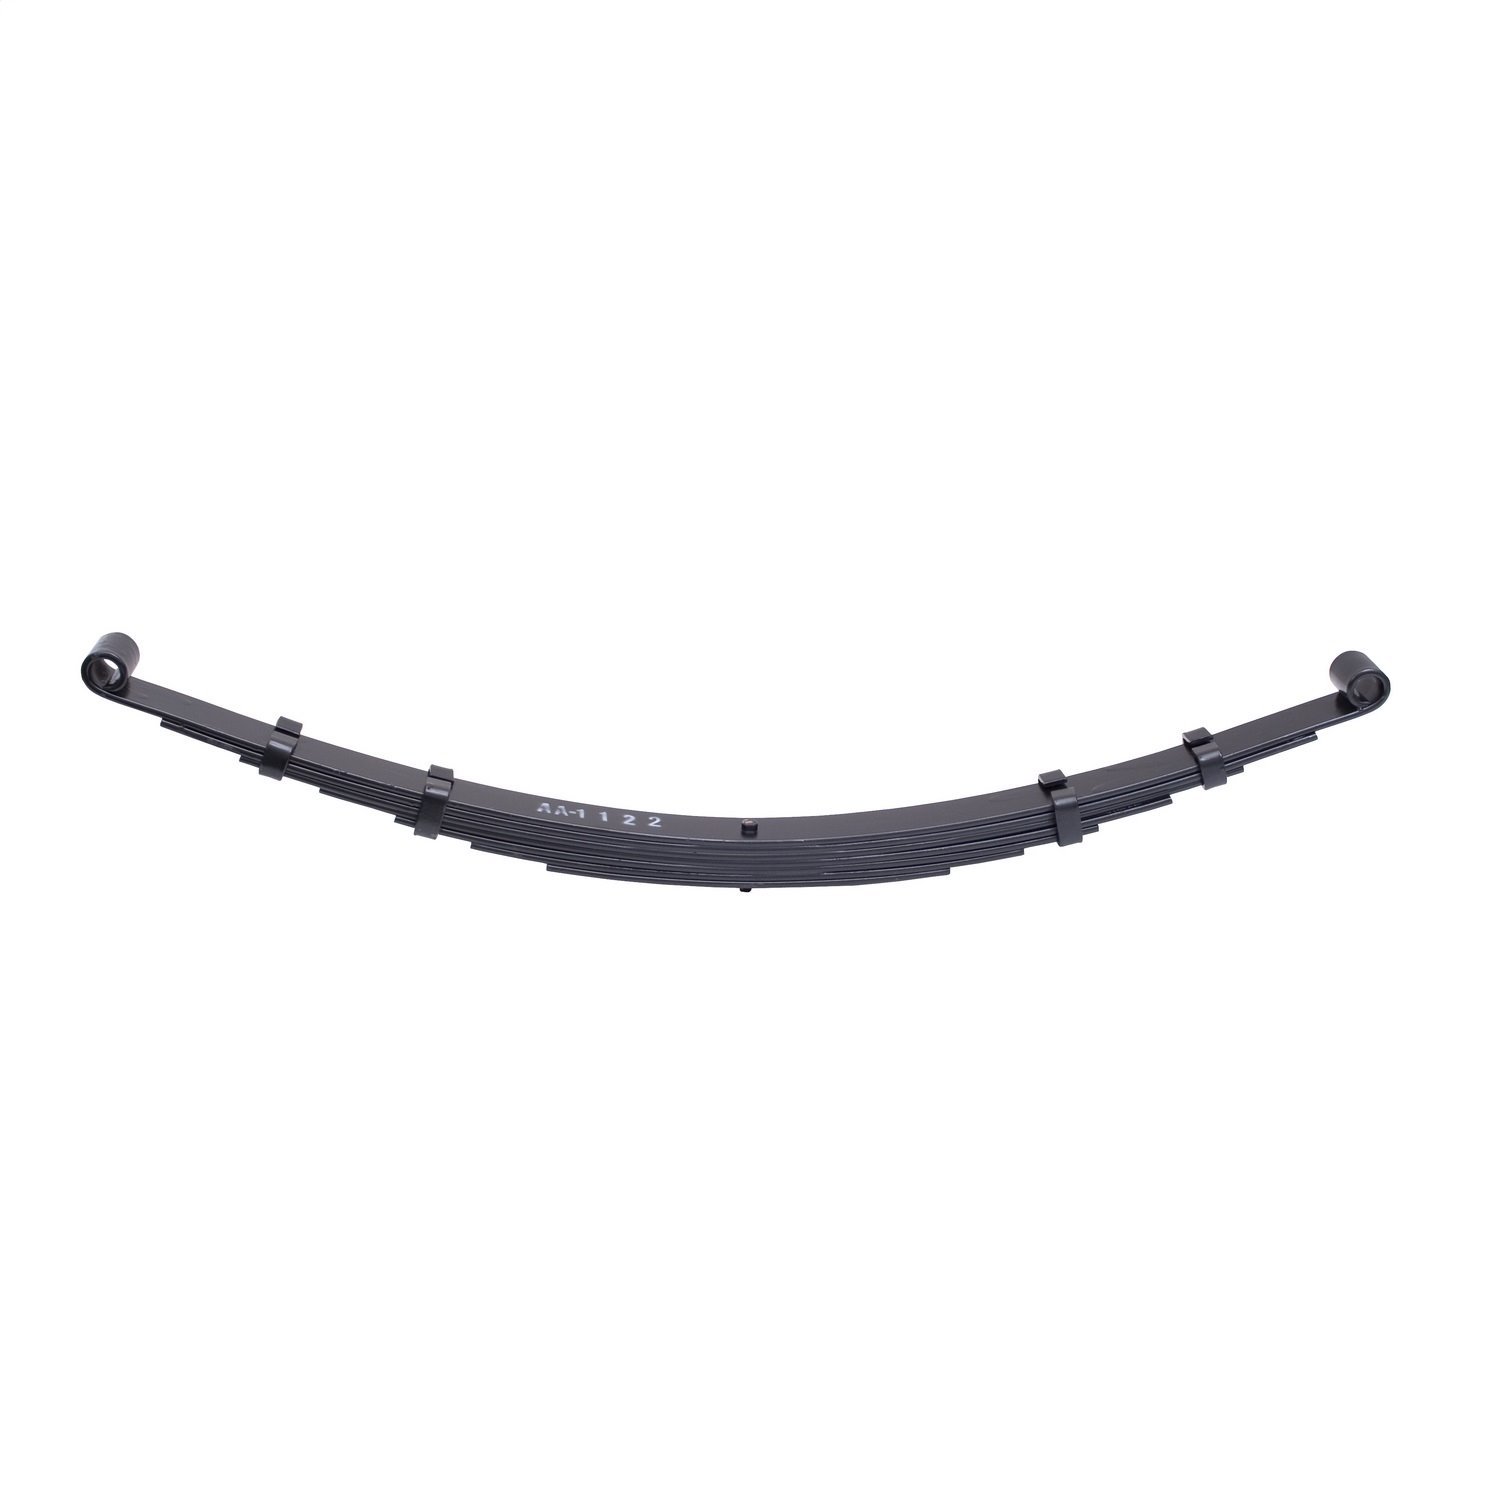 Replacement 7-leaf front leaf spring from Omix-ADA, Fits